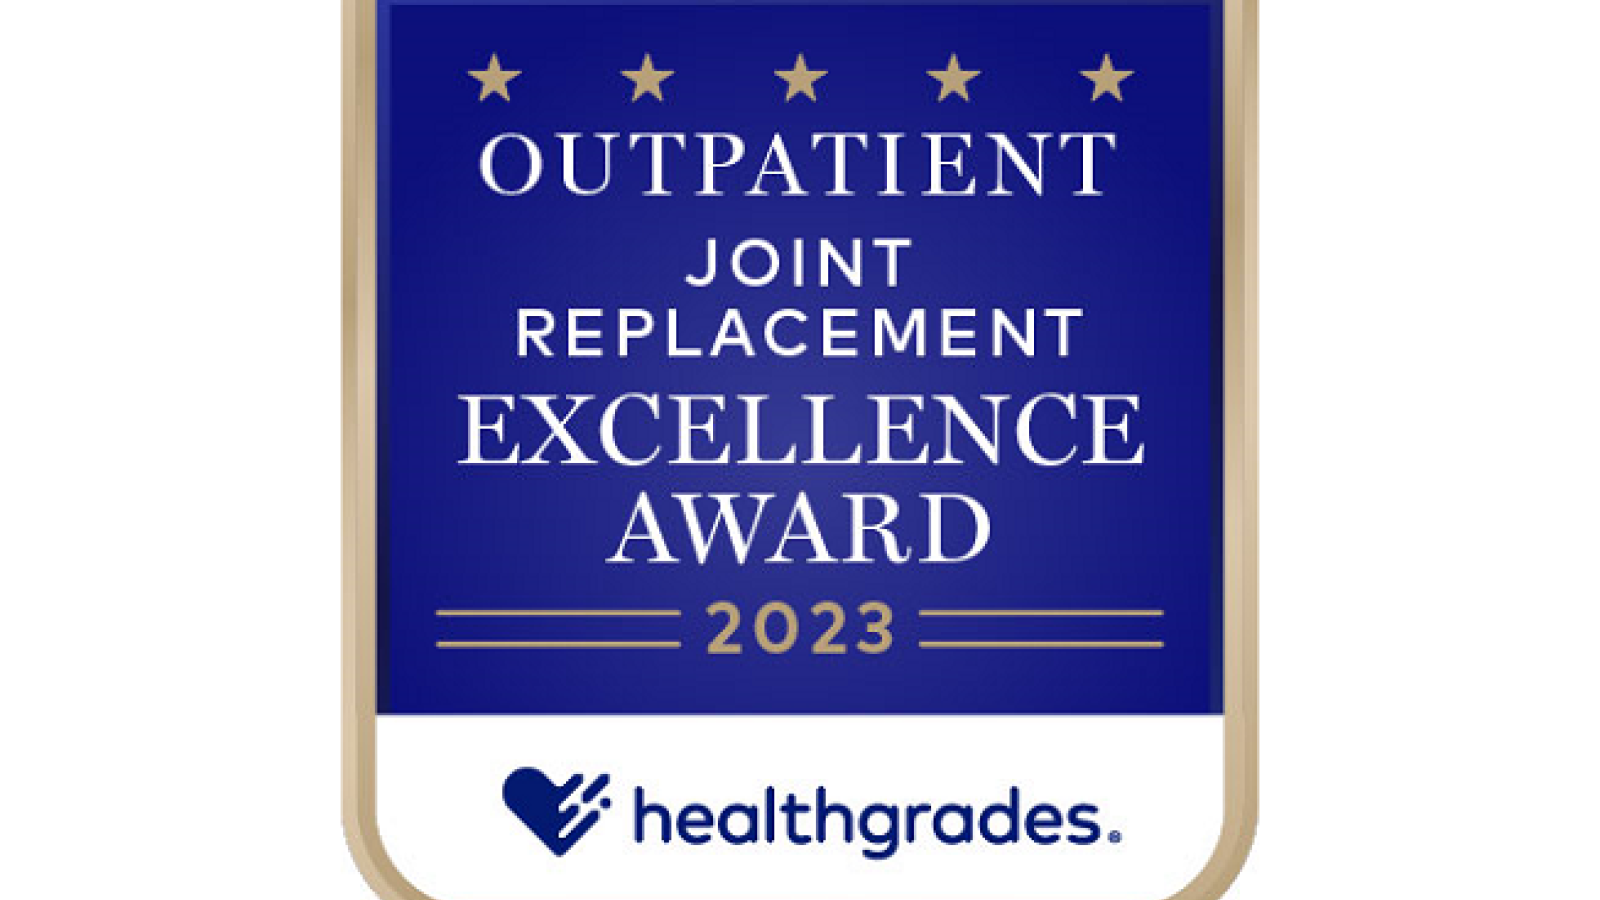 2023 Outpatient Joint Replacement Excellence Award